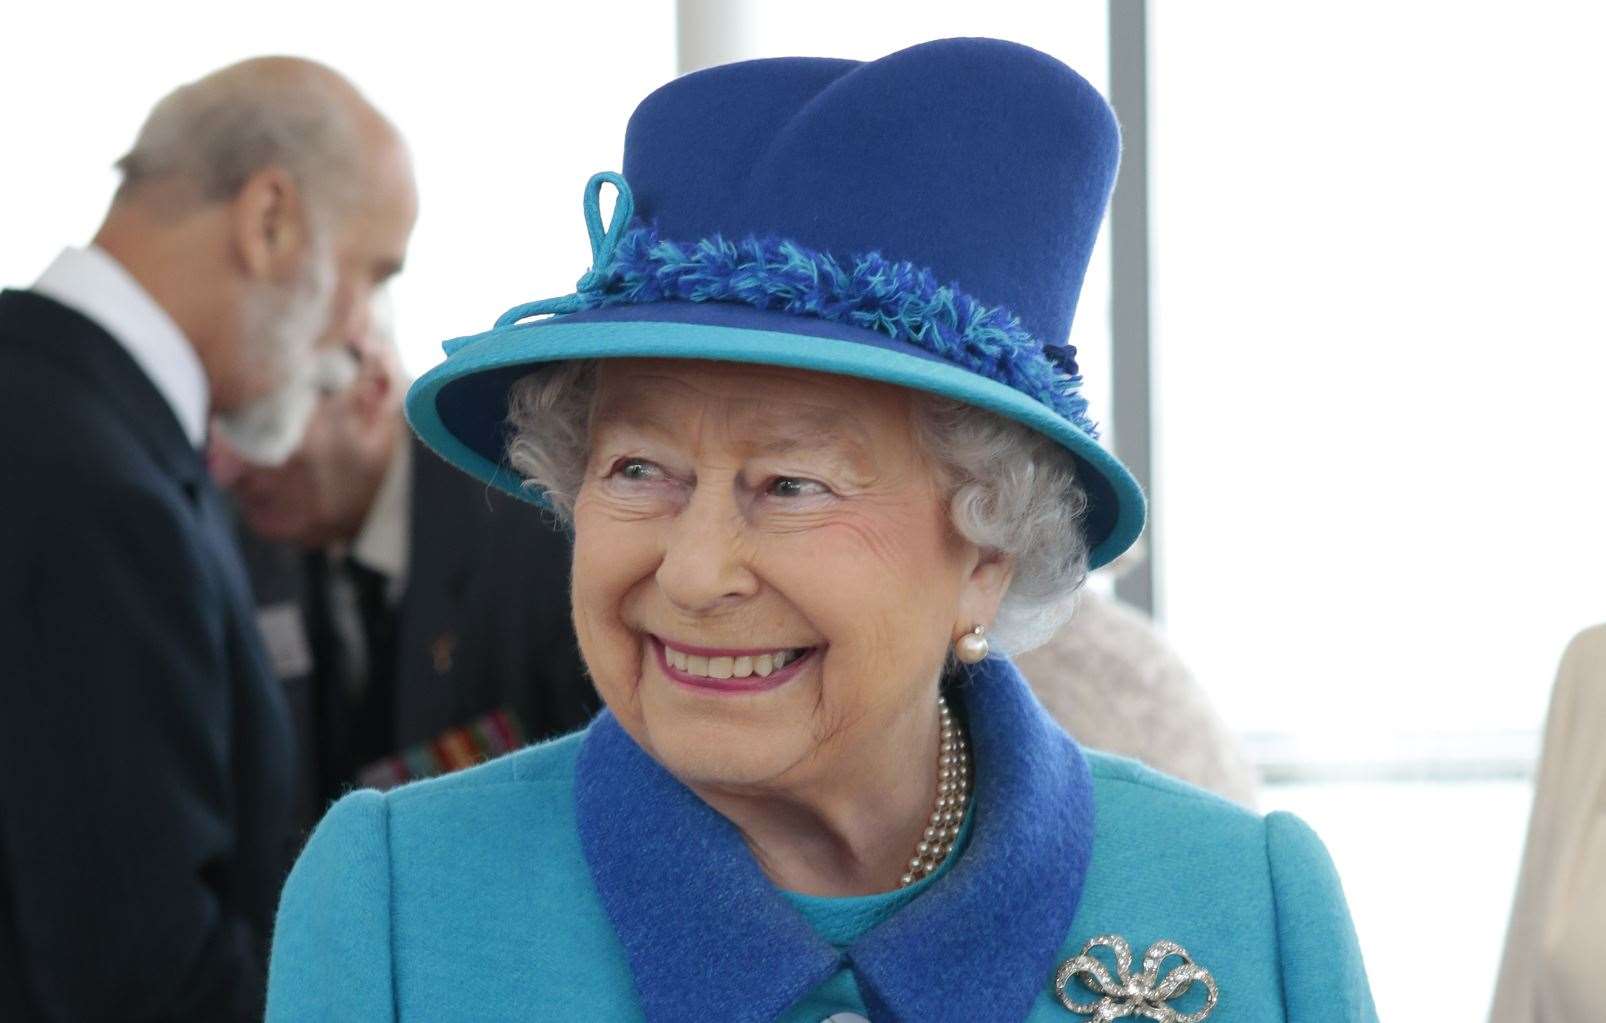 Her Majesty The Queen, pictured in 2015 during a visit to Capel-le-Ferne. Picture: Martin Apps